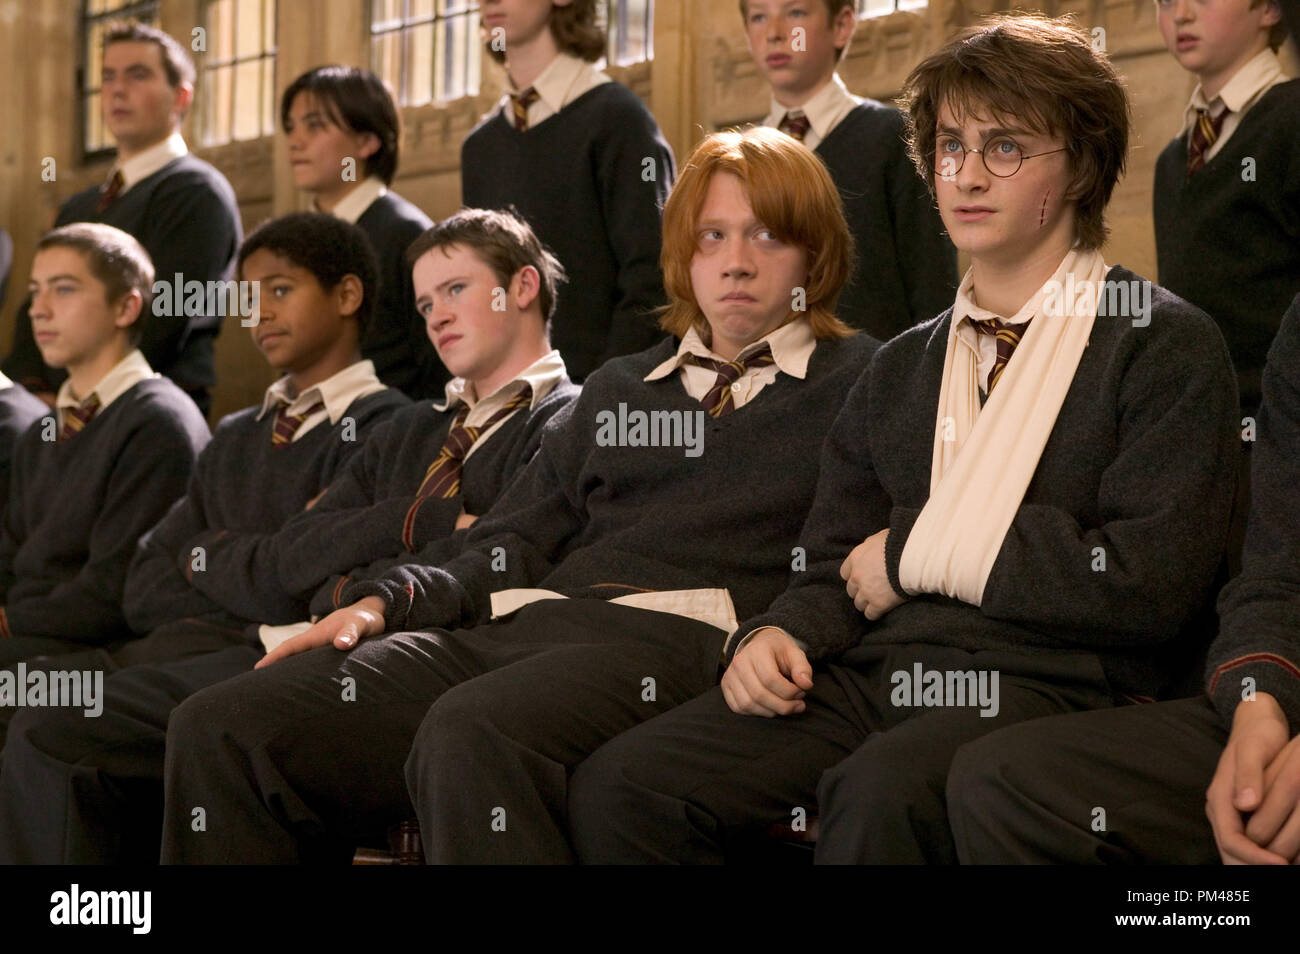 Warner Brothers Pictures Presents 'Harry Potter and the Goblet of Fire' Alfred Enoch, Devon Murray, Rupert Grint, Danielle Radcliffe © 2005 Warner Brothers Stock Photo